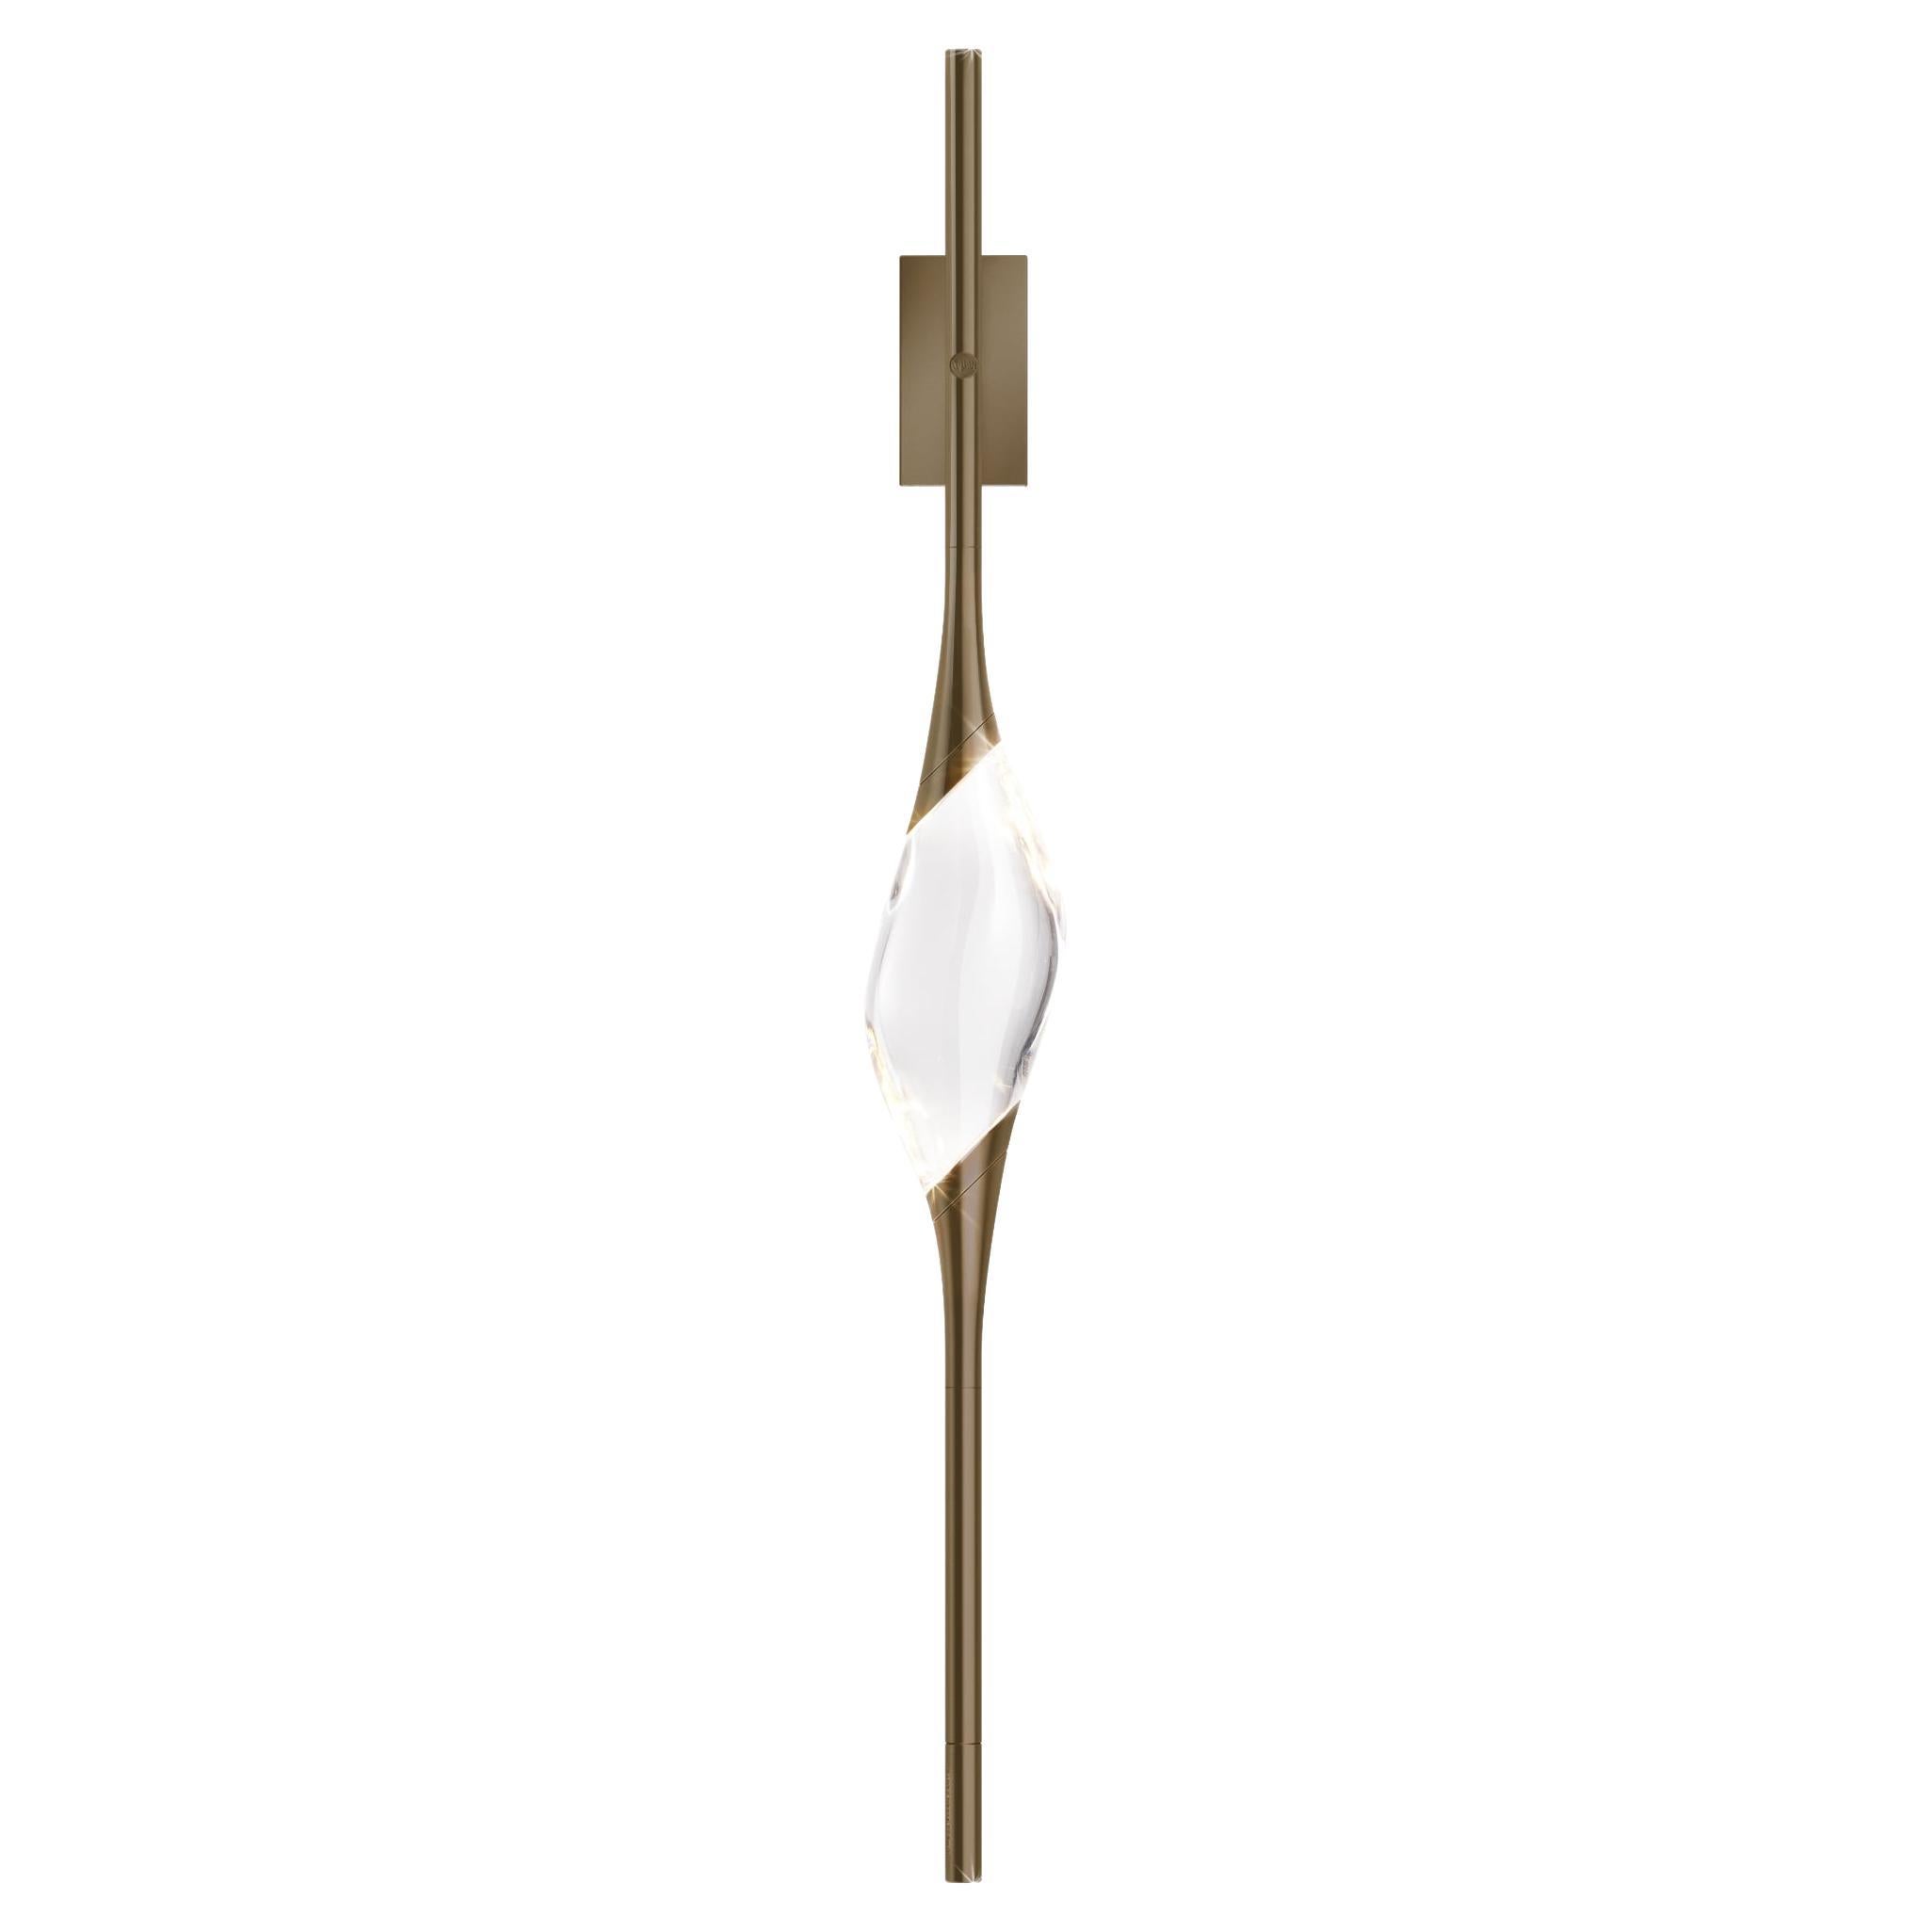 "Il Pezzo 12 Wall Sconce" - bronze - crystal - LEDs - Made in Italy en vente